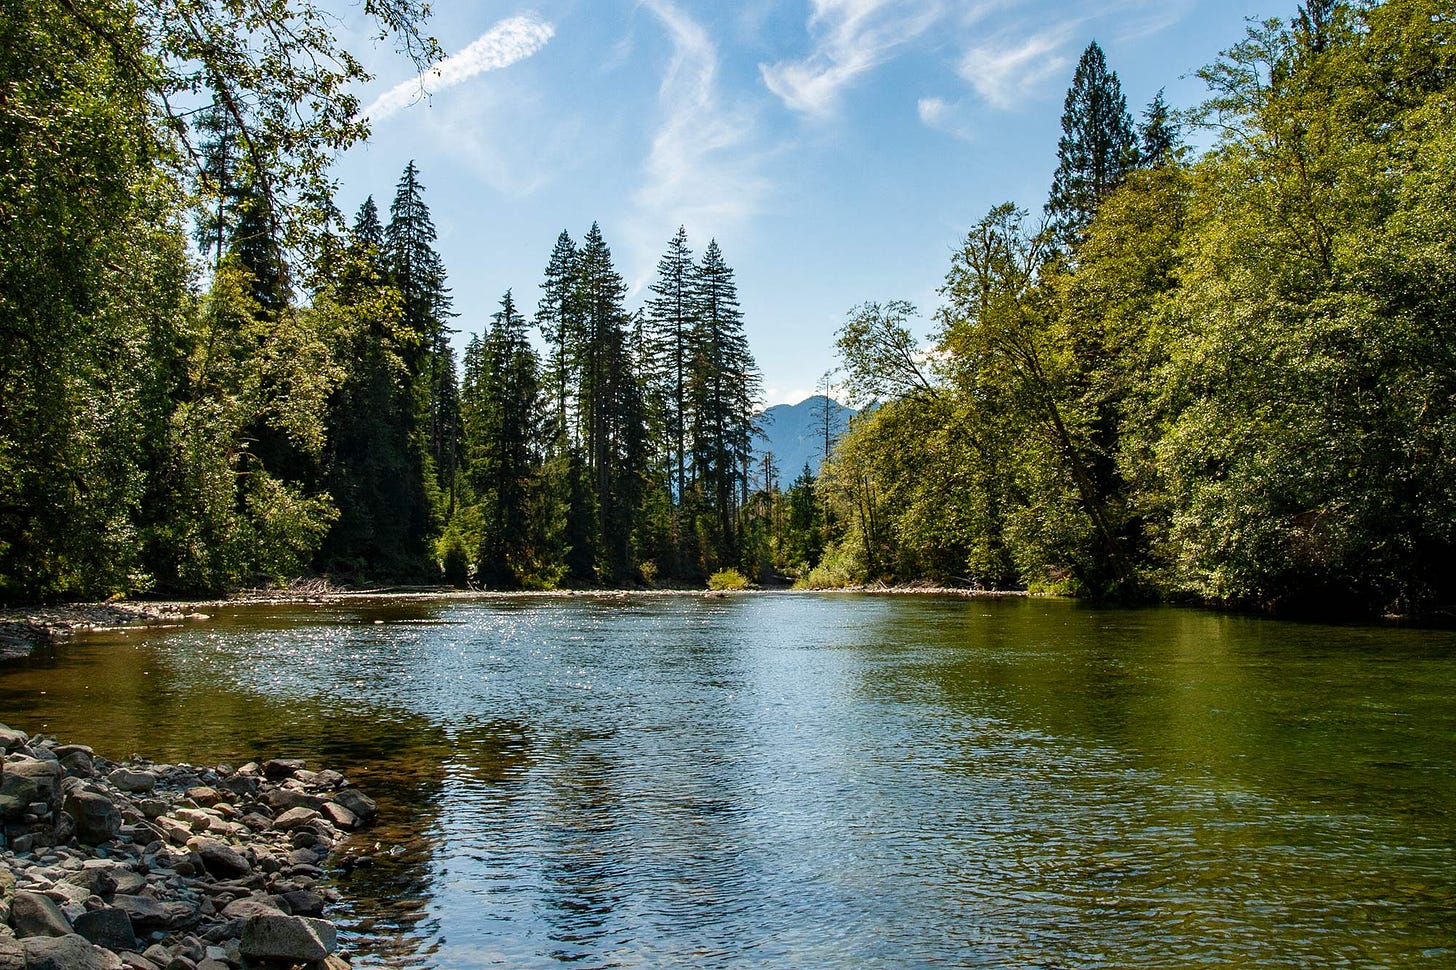 looking downriver from the rocky shoreline towards a distant blue-hazed mountain beneath a blue sky striped with wispy white clouds, the river green and blue reflecting the sky and lush trees overhanging the far bank